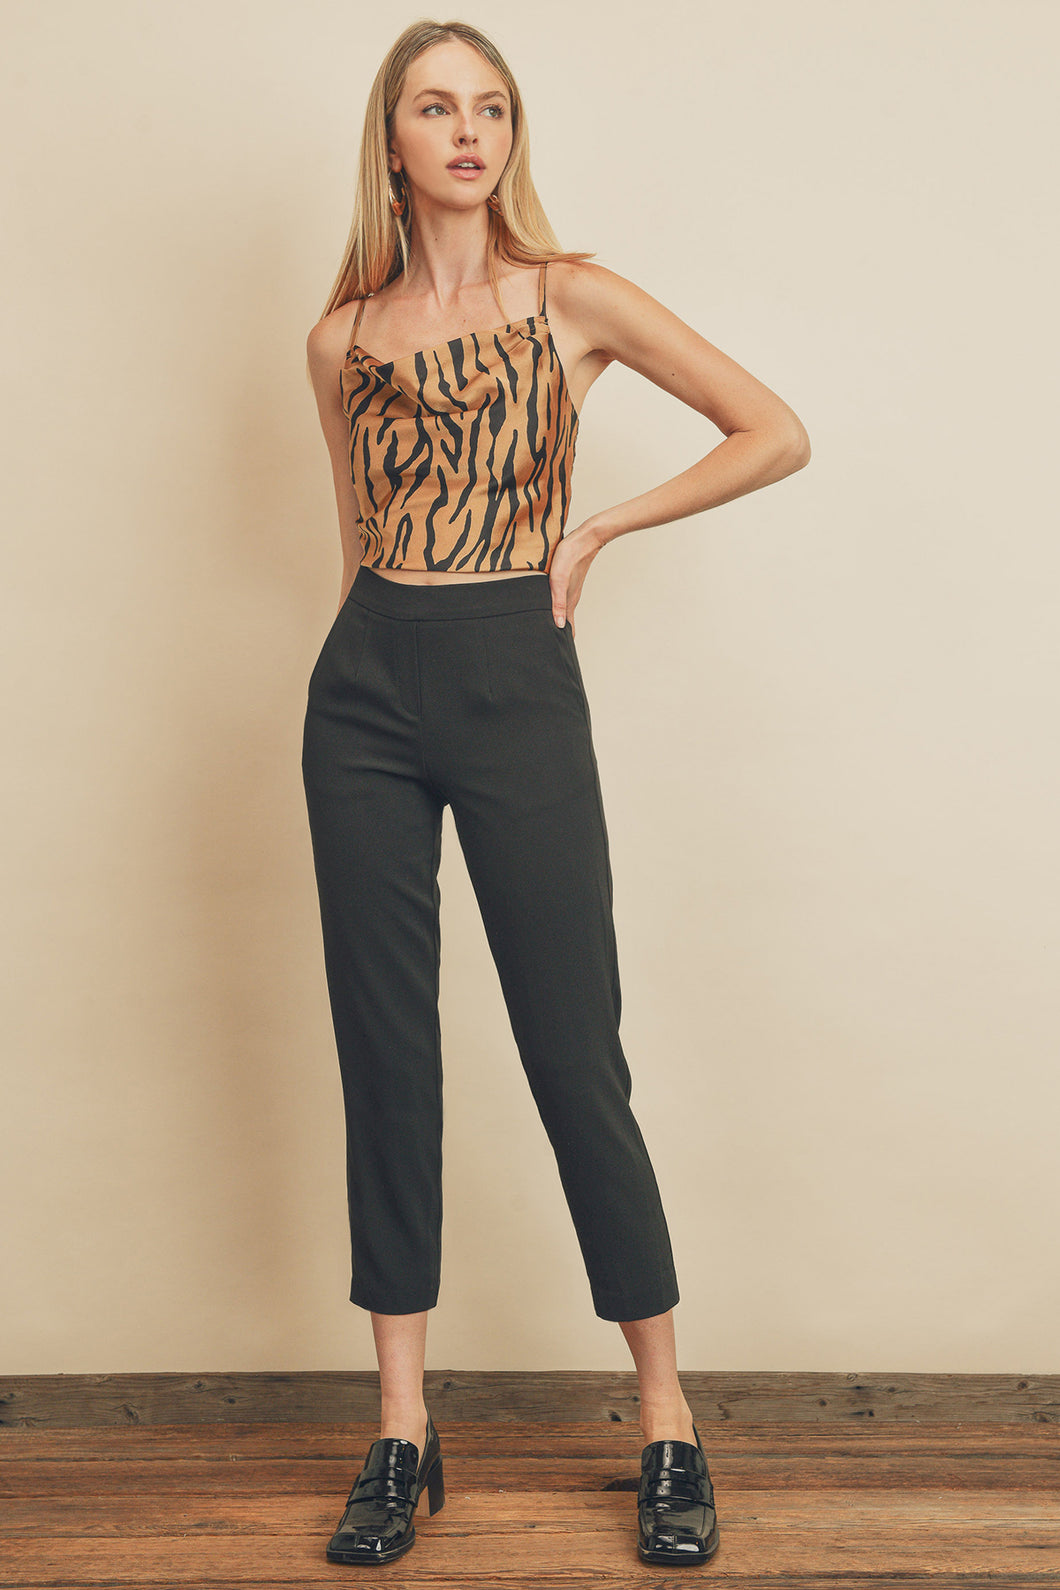 Tapered Crop Pants